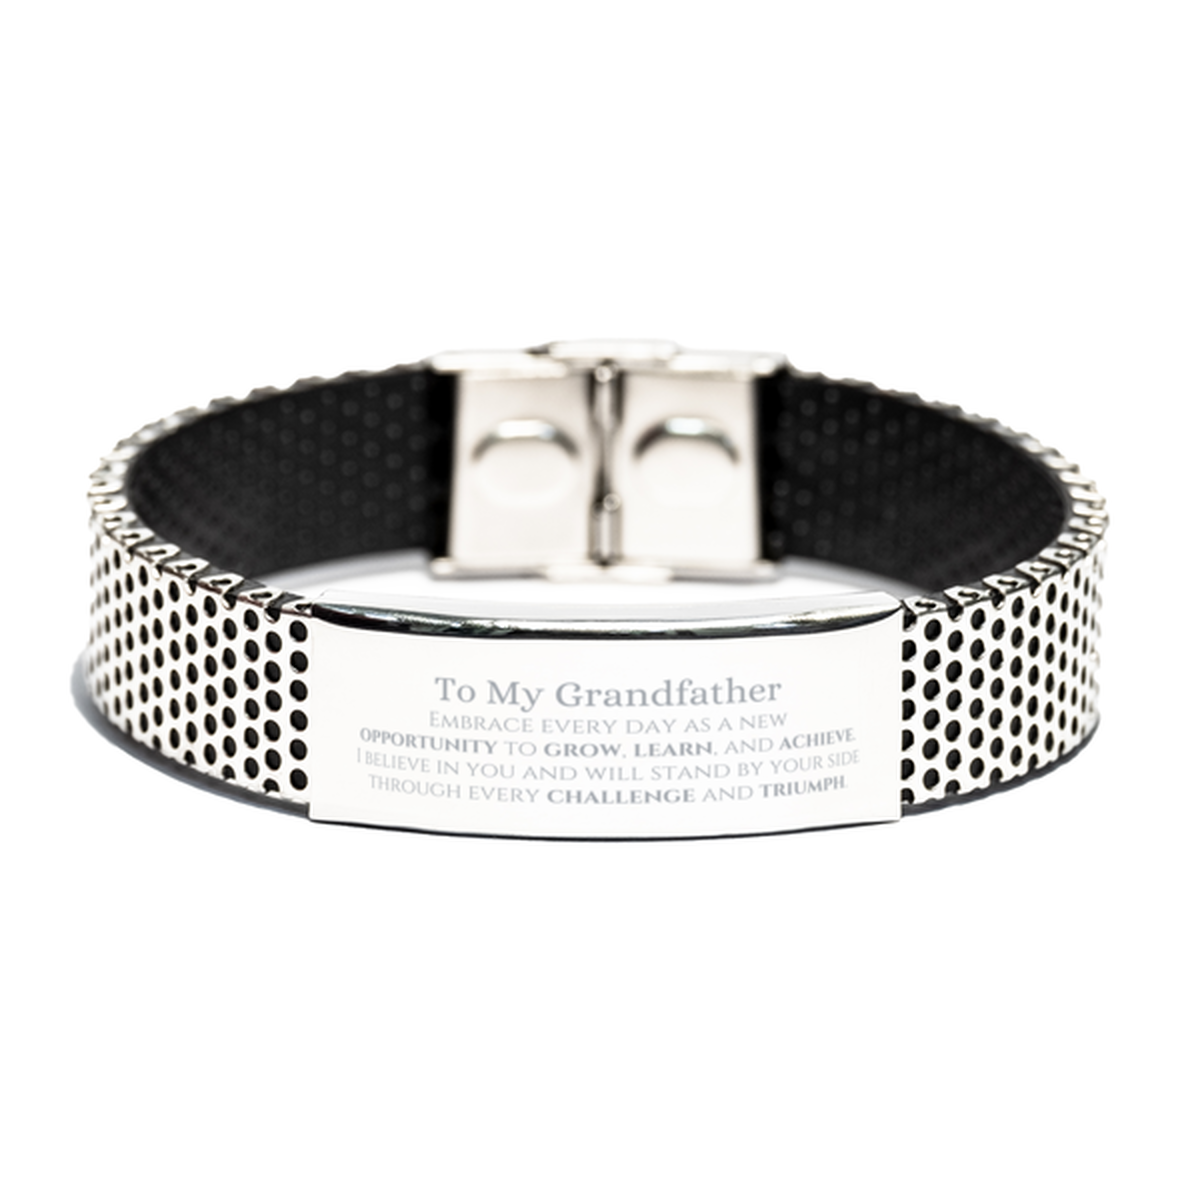 To My Grandfather Gifts, I believe in you and will stand by your side, Inspirational Stainless Steel Bracelet For Grandfather, Birthday Christmas Motivational Grandfather Gifts